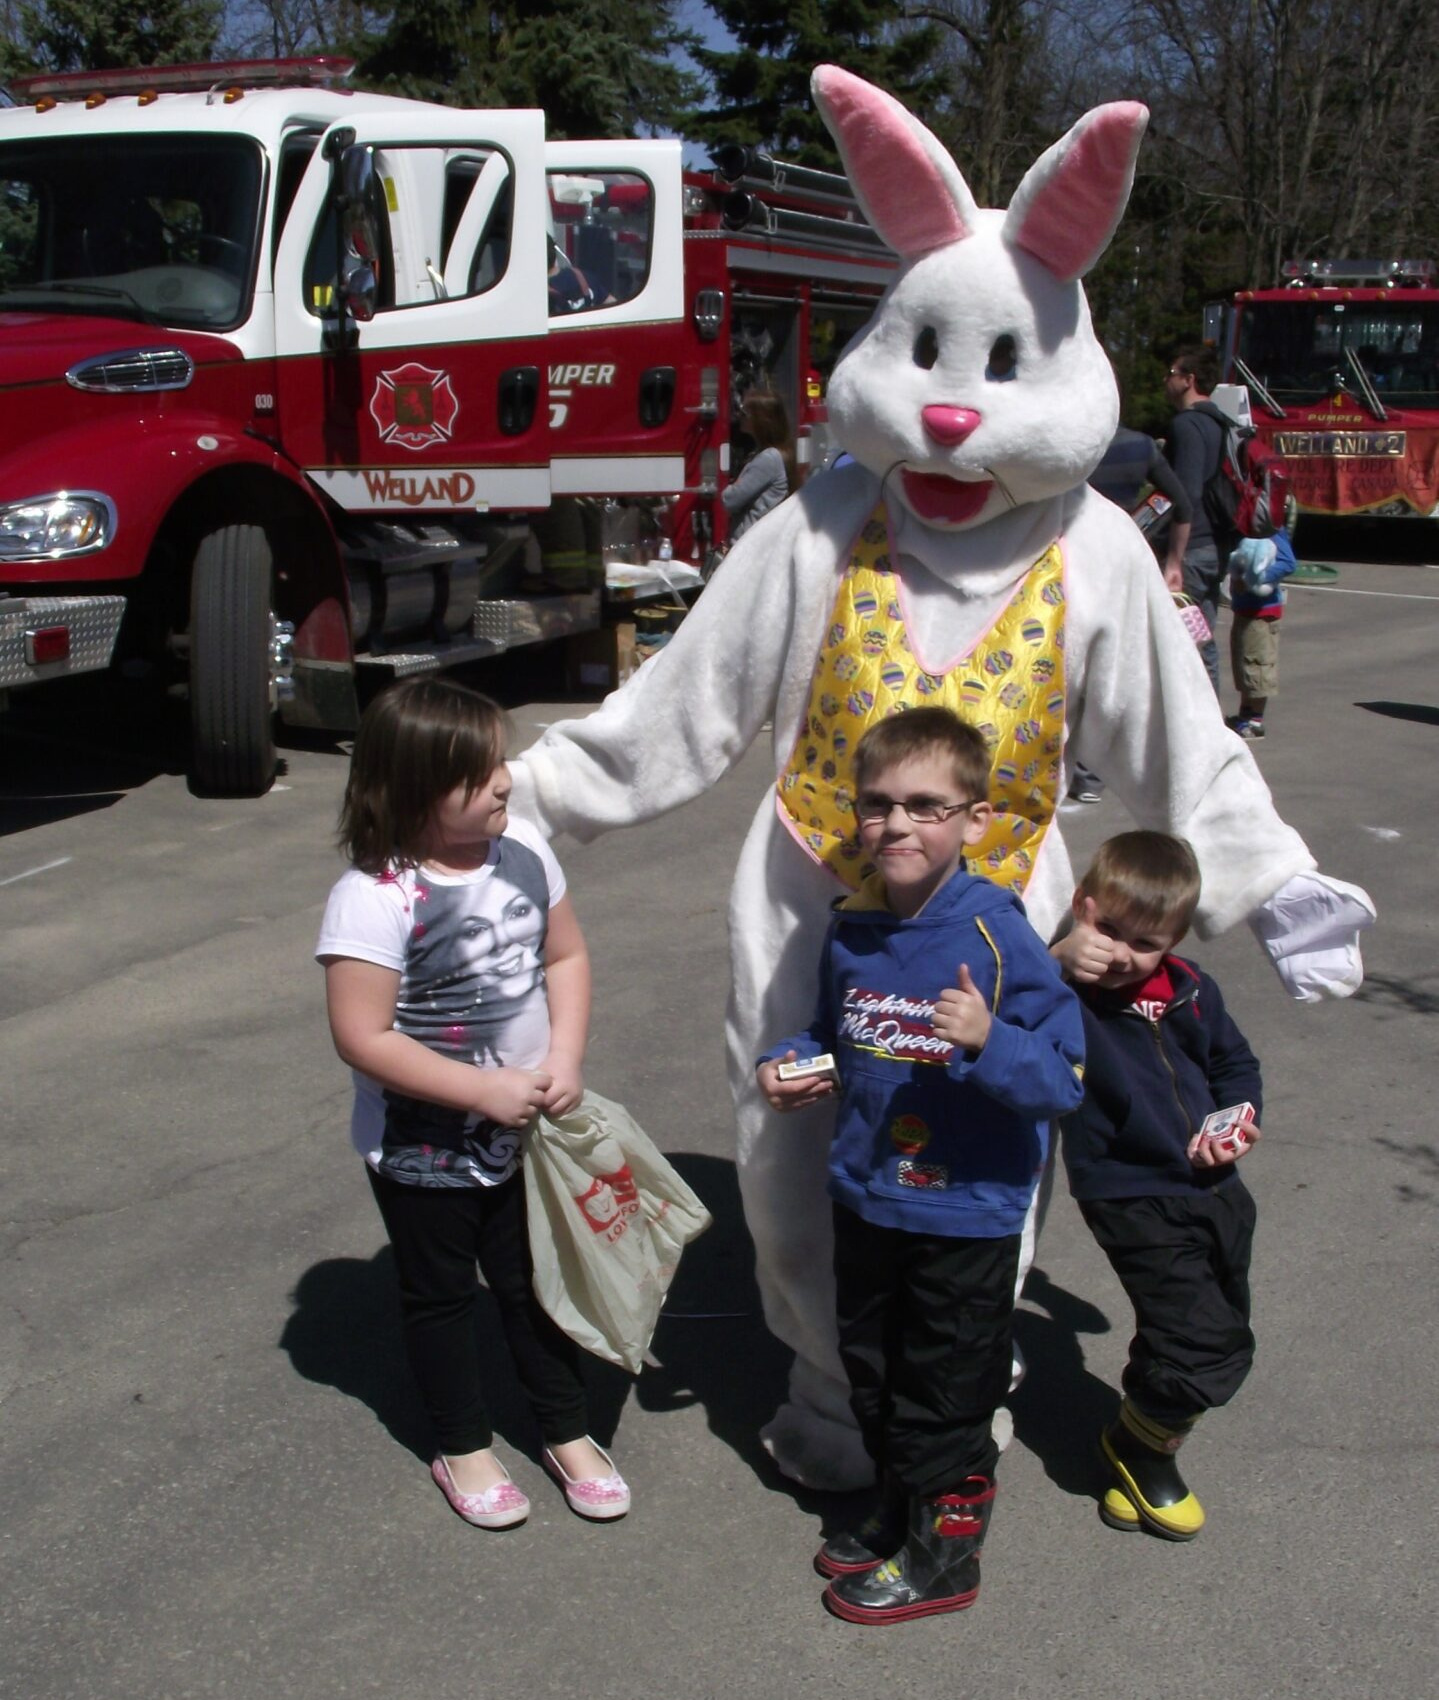 Merrittville Speedway Hosts Inaugural Easter Egg Hunt for Families within the Niagara Region and Beyond